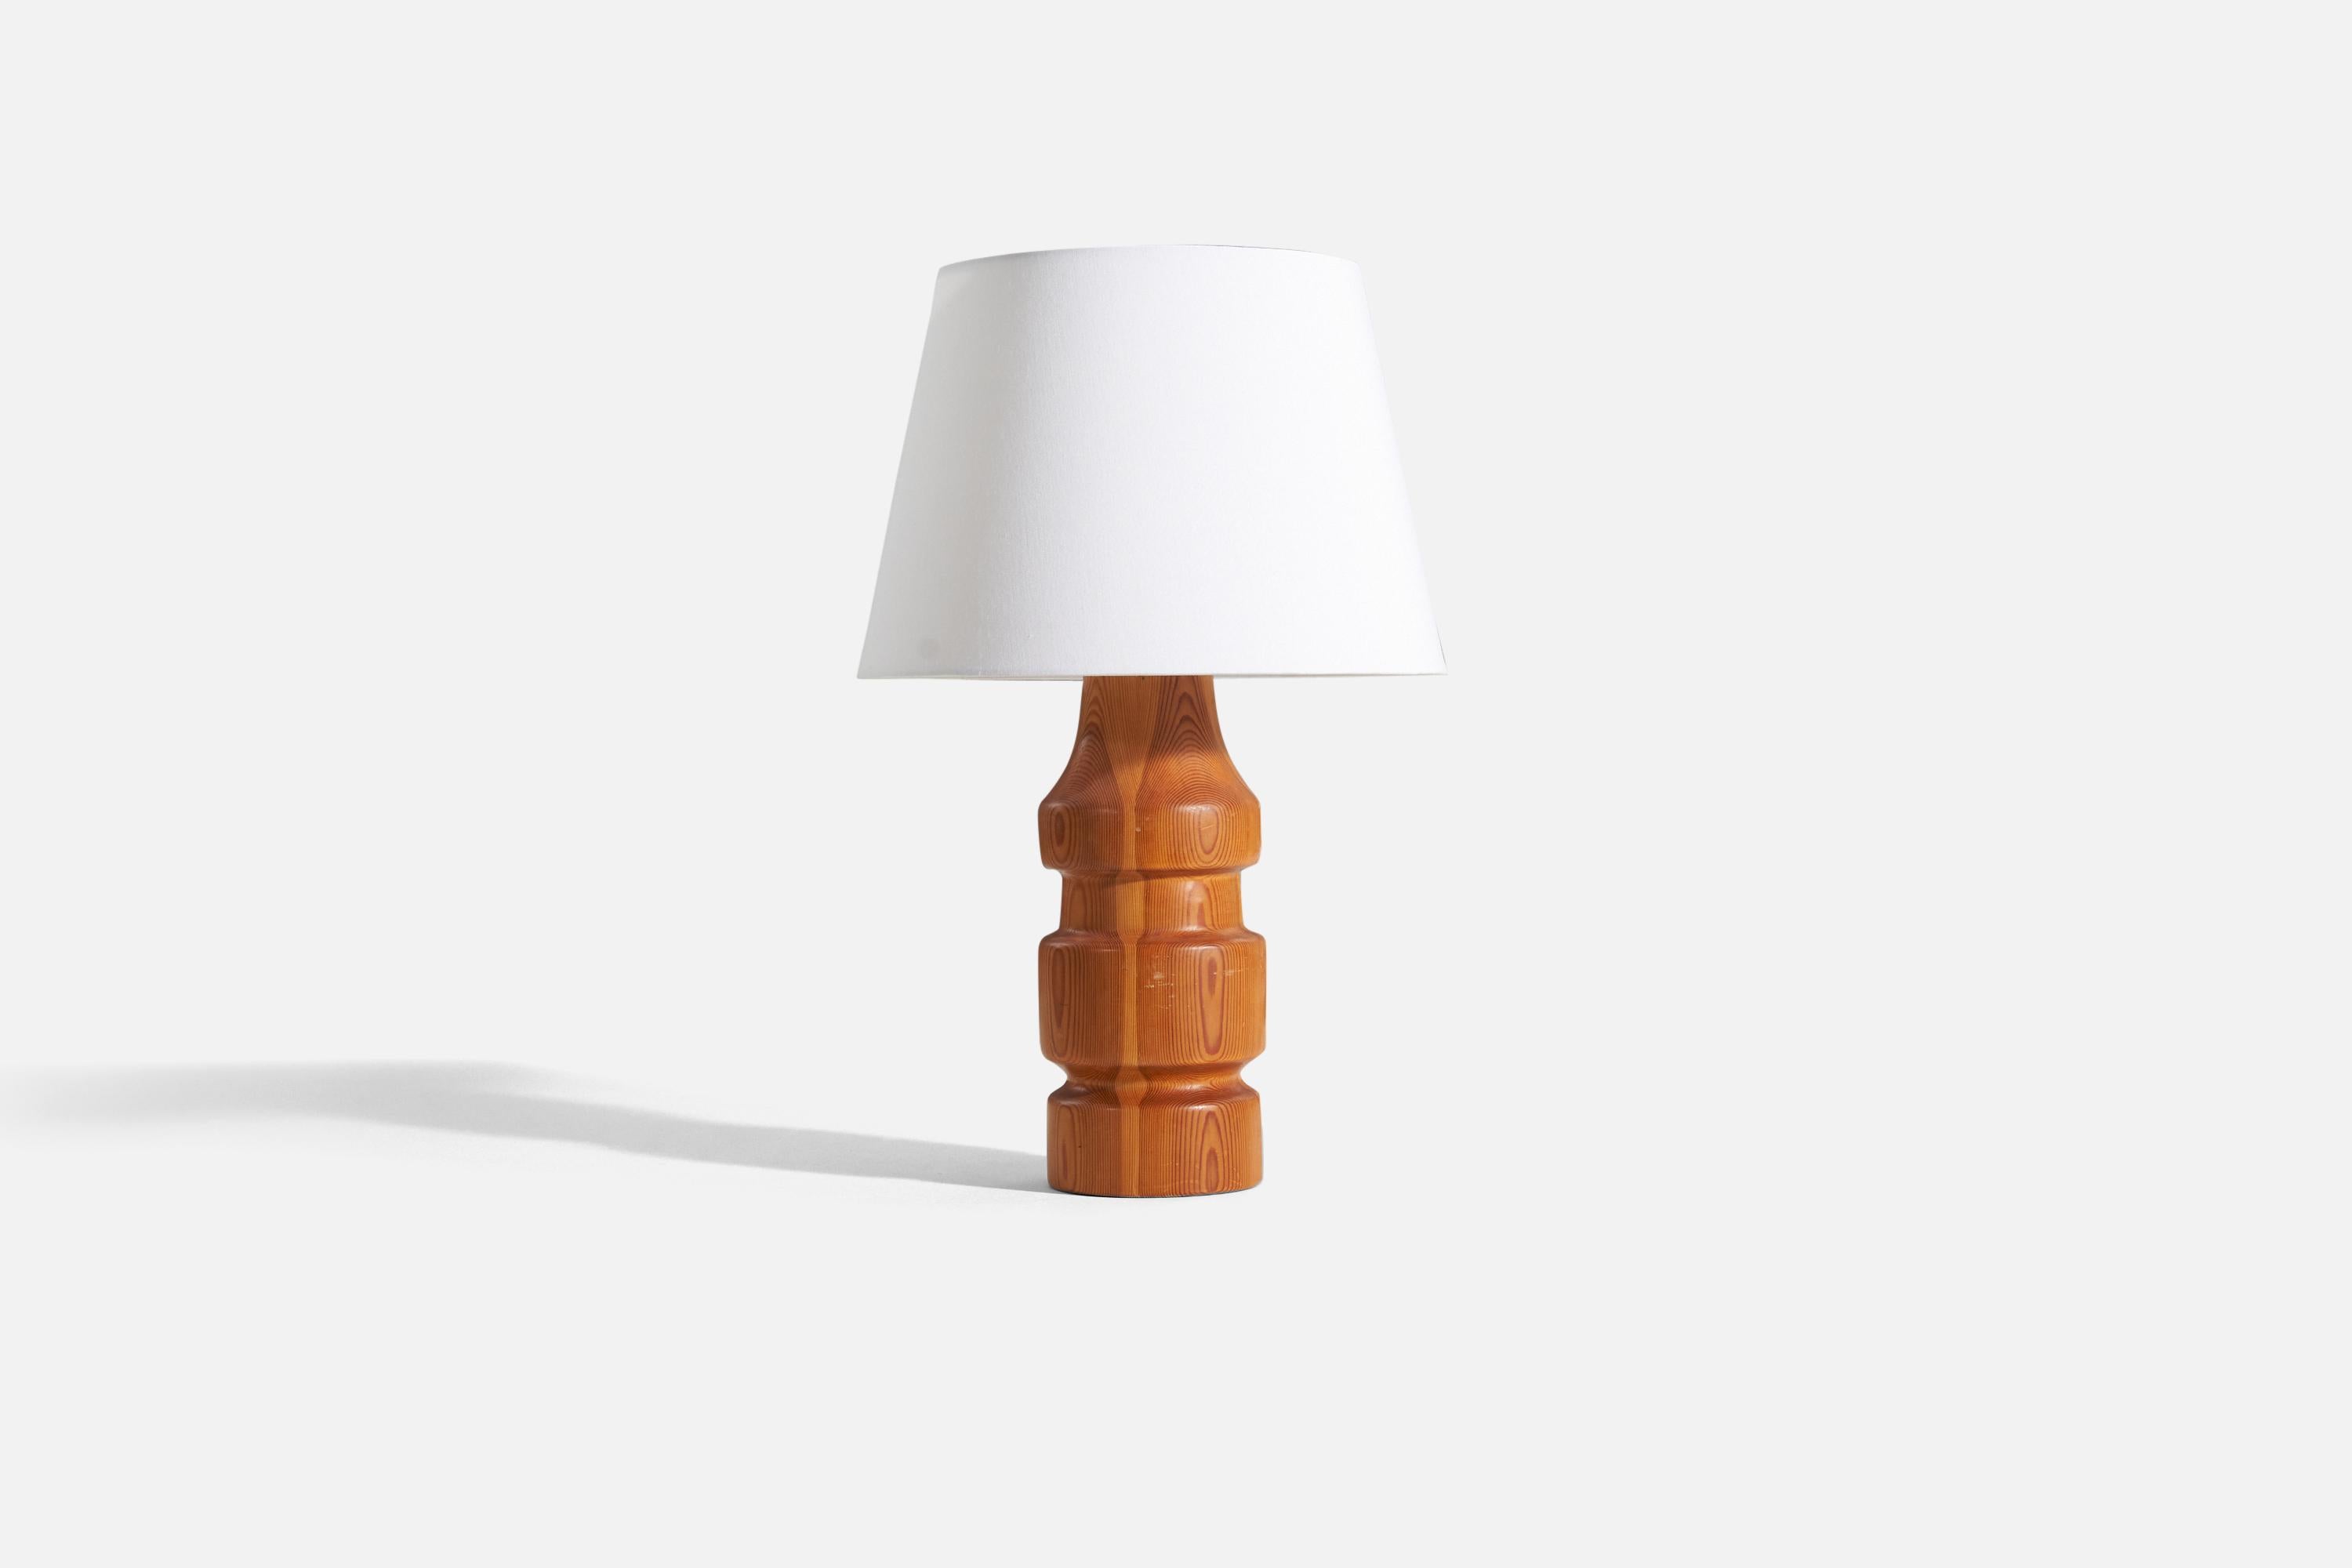 A pine table lamp, designed and produced by a Swedish designer, Sweden, 1960s.

Sold without lampshade. 
Dimensions of lamp (inches) : 16.5 x 5.25 x 5.25 (H x W x D)
Dimensions shade (inches) : 10 x 14.125 x 10 (T x B x H)
Dimension of lamp